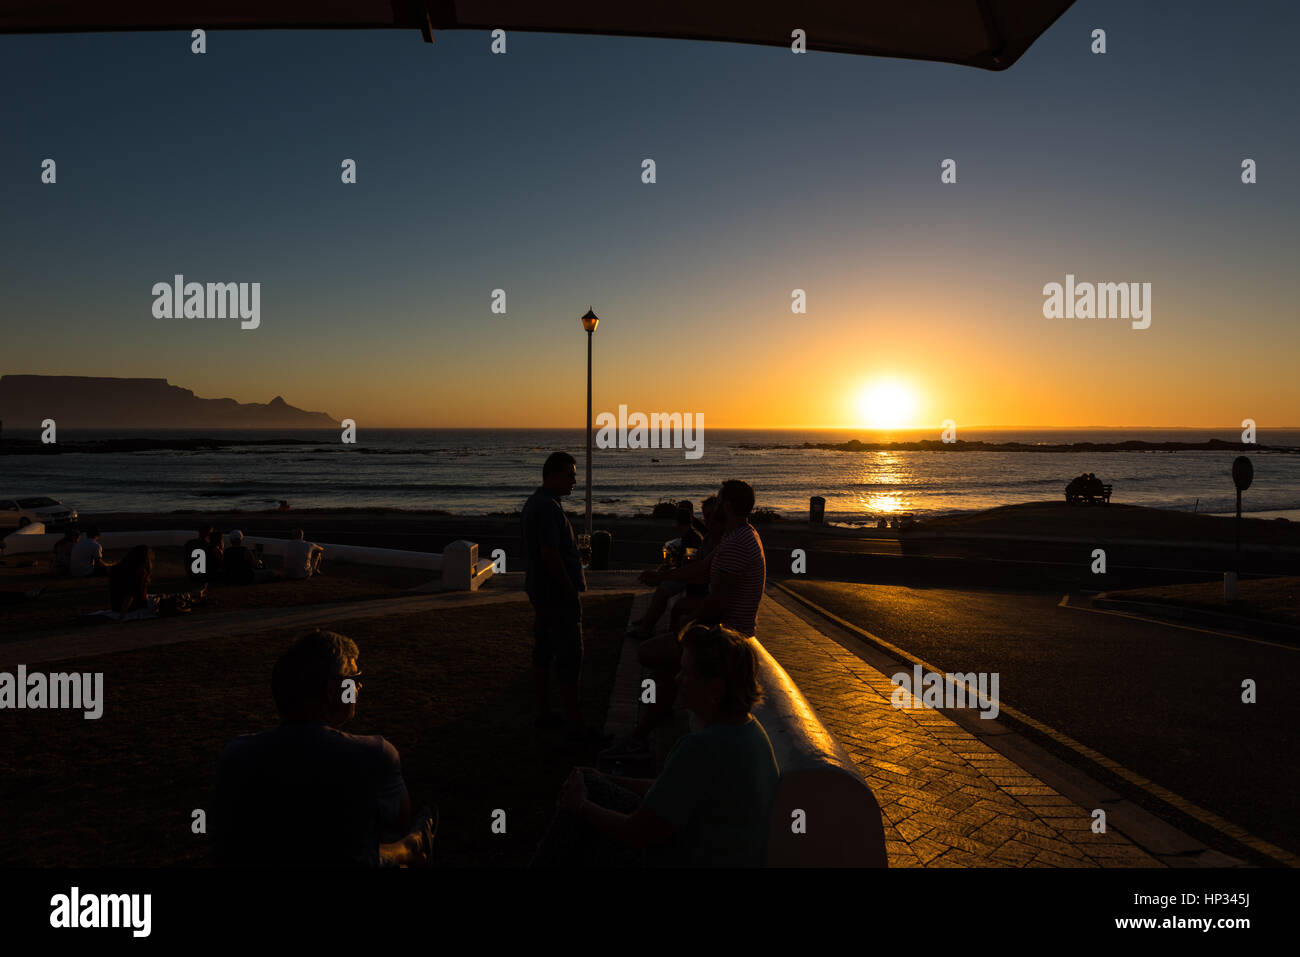 Cape Town, South Africa - November 15, 2016: Unidentified people are enjoying their drinks during the colorful sunset on the beach at Bloubergstrand i Stock Photo